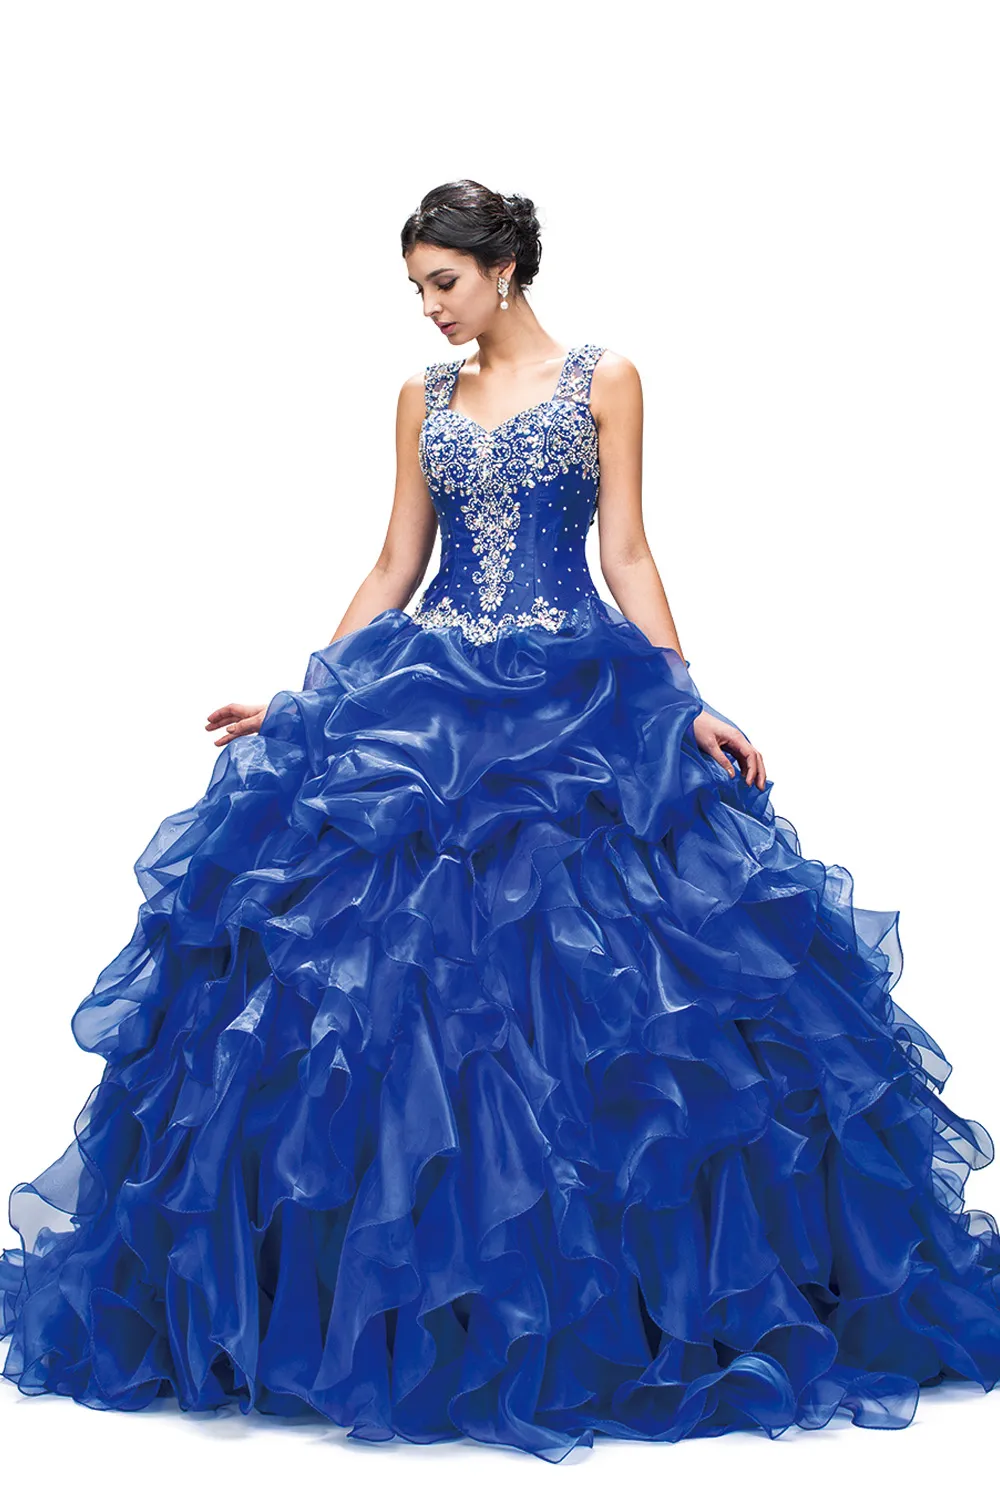 2022 Quinceanera Dresses Royal Blue Ball Gown Organza Ruffled Layered Beaded Crystal Long Sweep Train Party Prom Ball Gowns